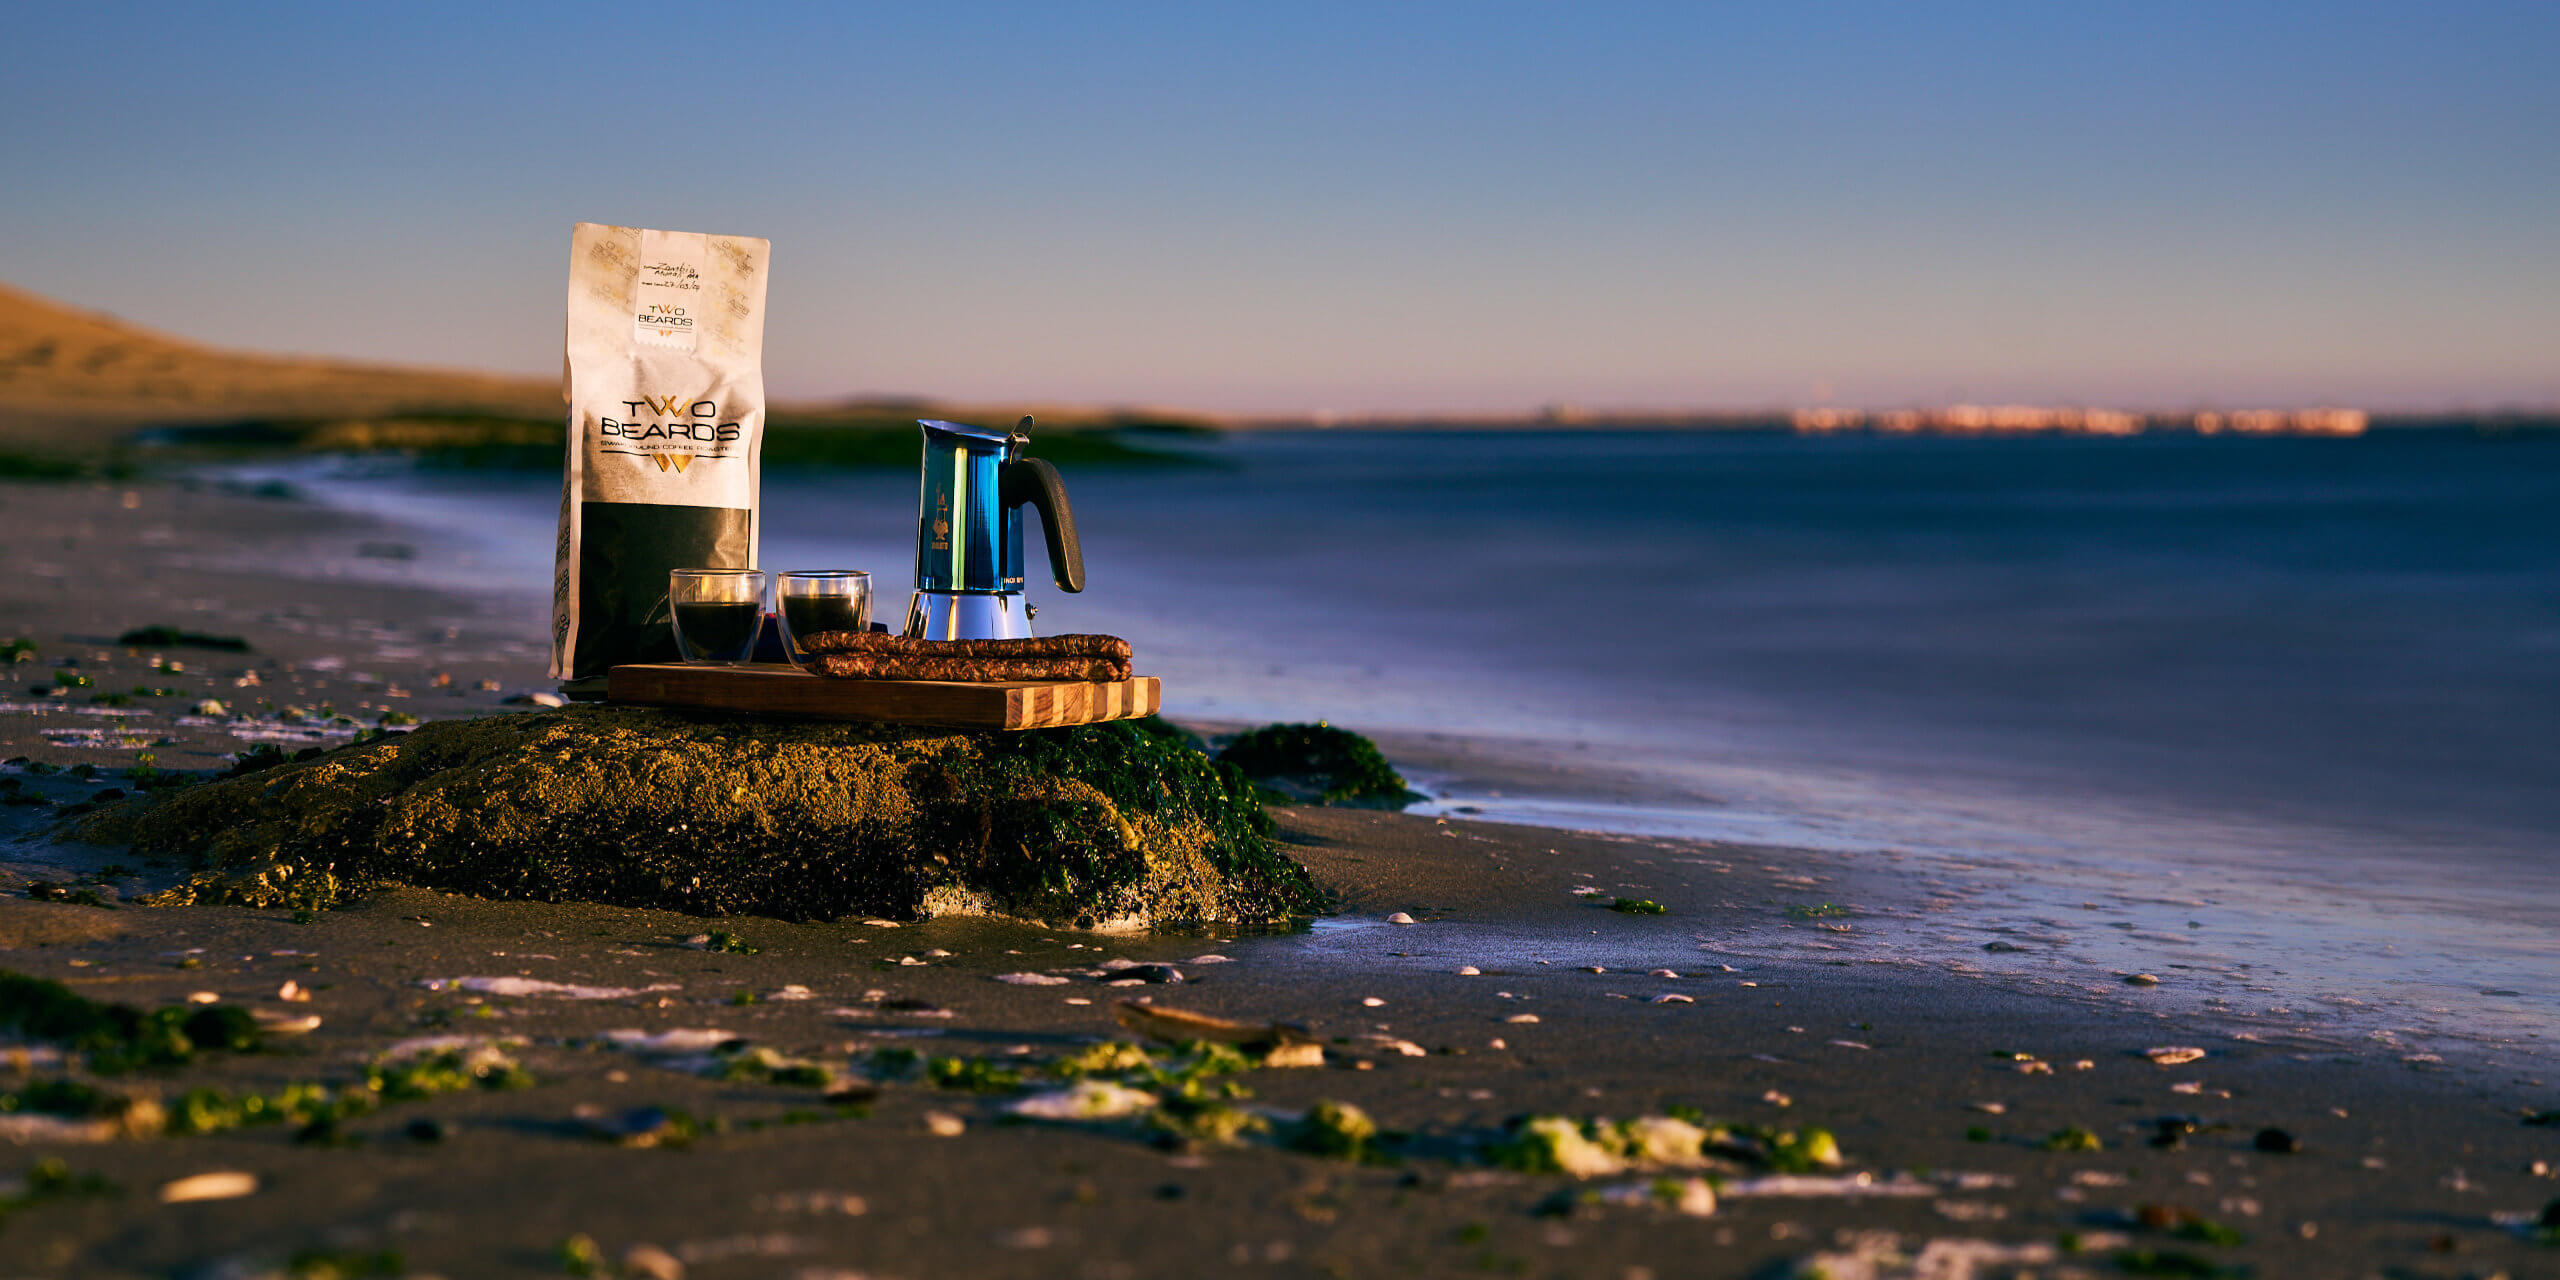 A tranquil beach scene at dusk featuring a bag of Two Beards Coffee, a metallic coffee maker, and two cups on a wooden board atop a seaweed-covered rock, with the ocean and distant flamingos in the  background.